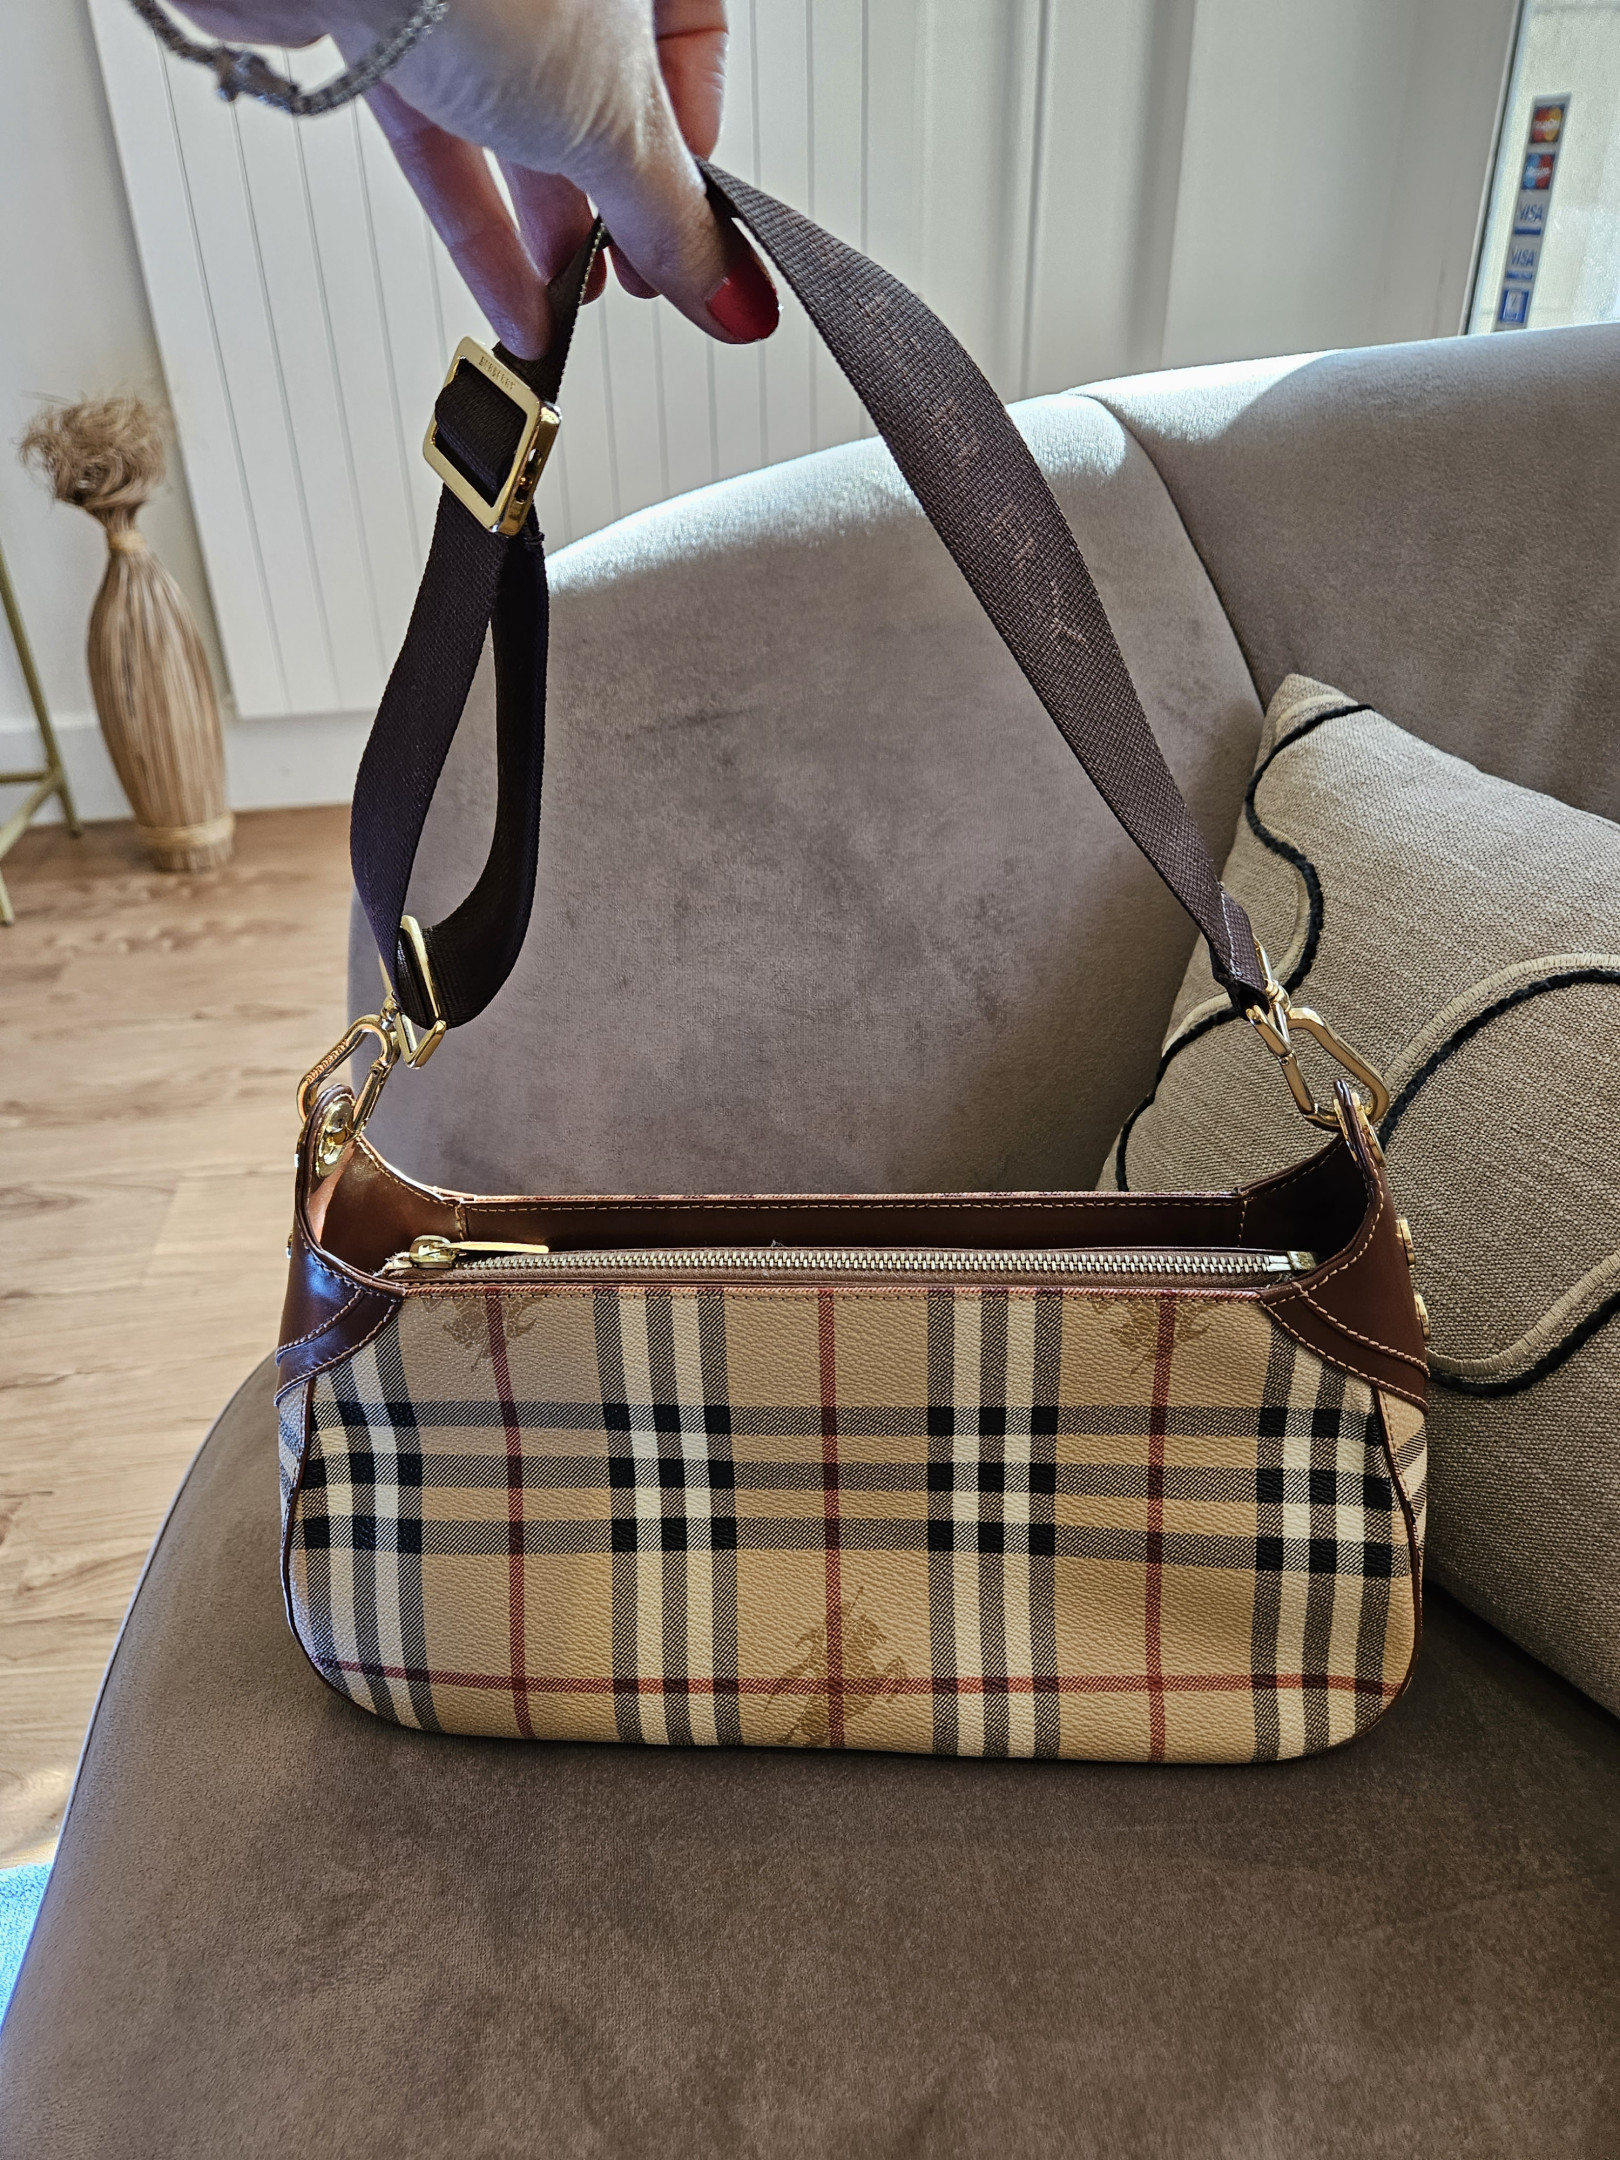 BURBERRY: London bag in canvas - Beige